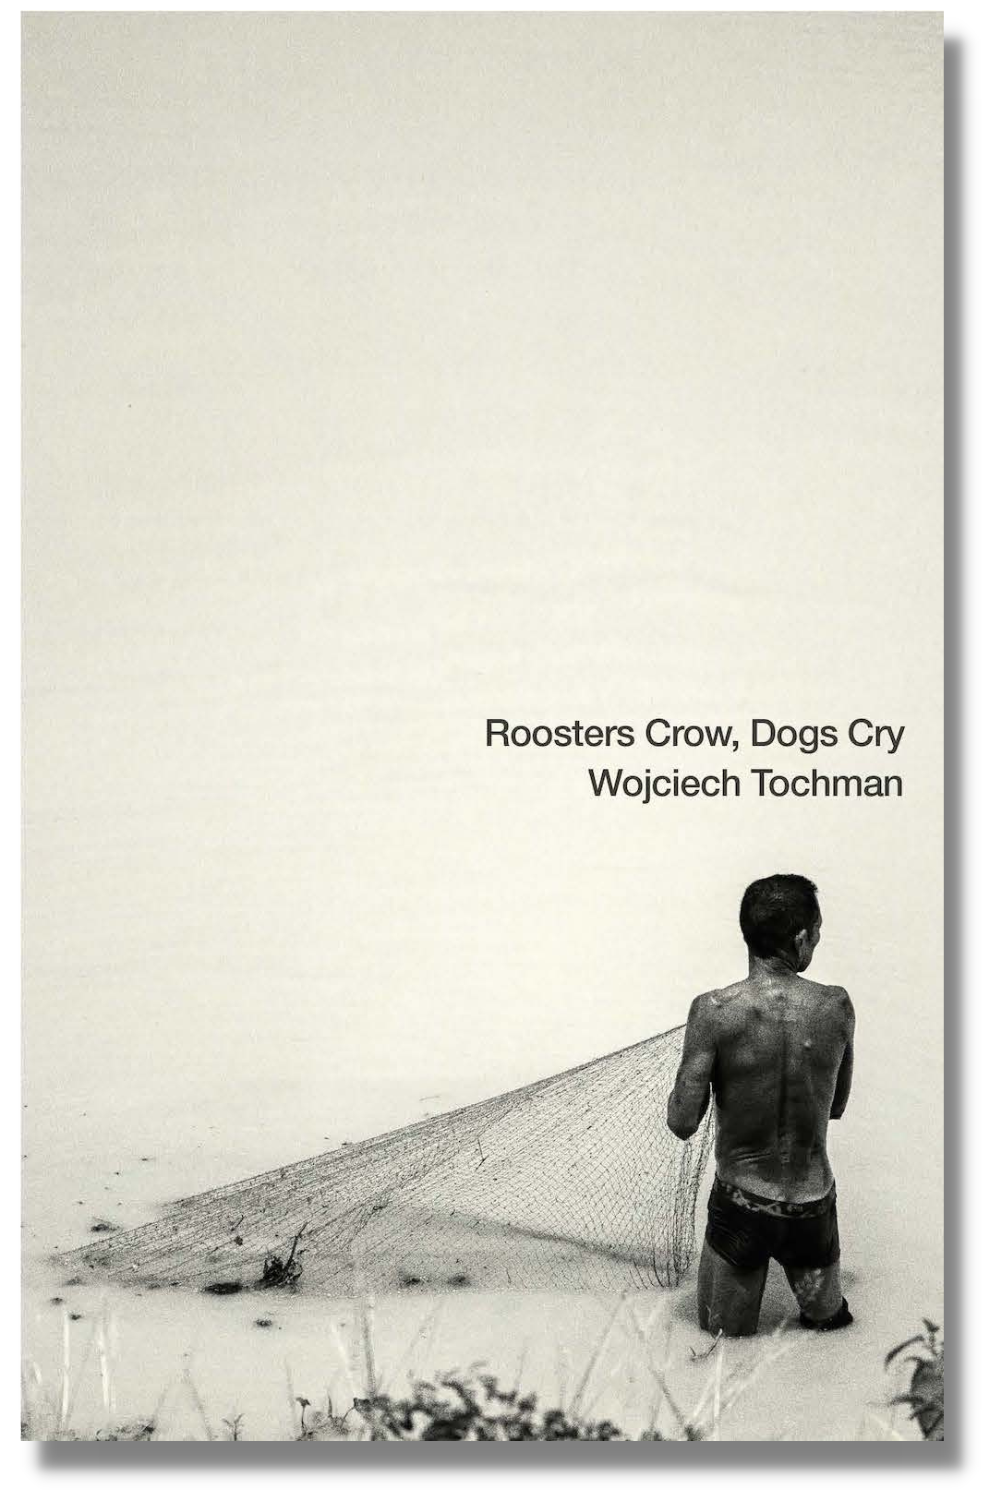 The cover of "Roosters Crow, Dogs Cry"